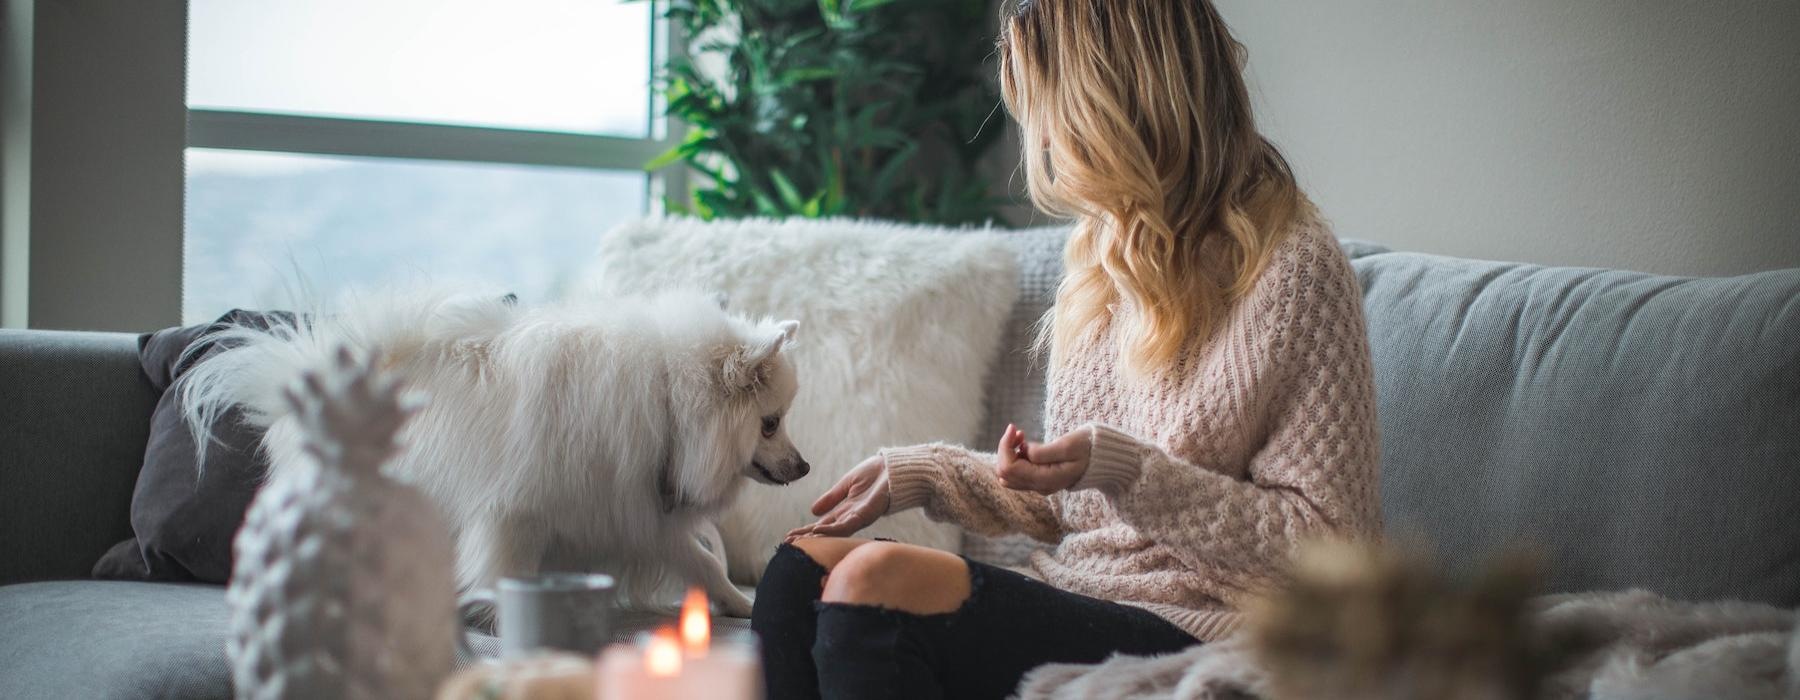 a person sitting on a couch with a dog and a candle